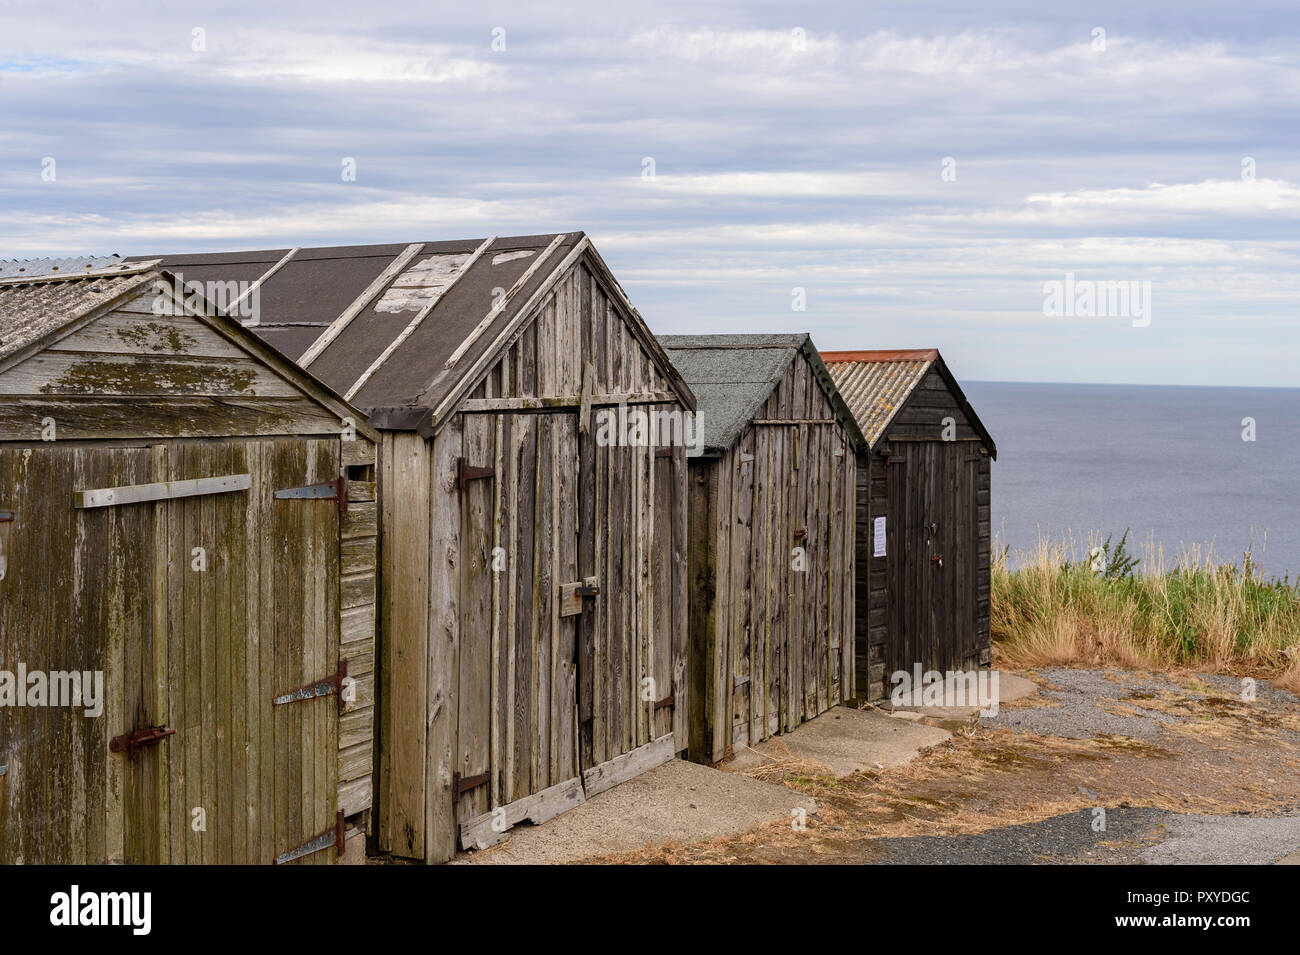 Wooden sheds on the seashore at Gardenstown. Stock Photo